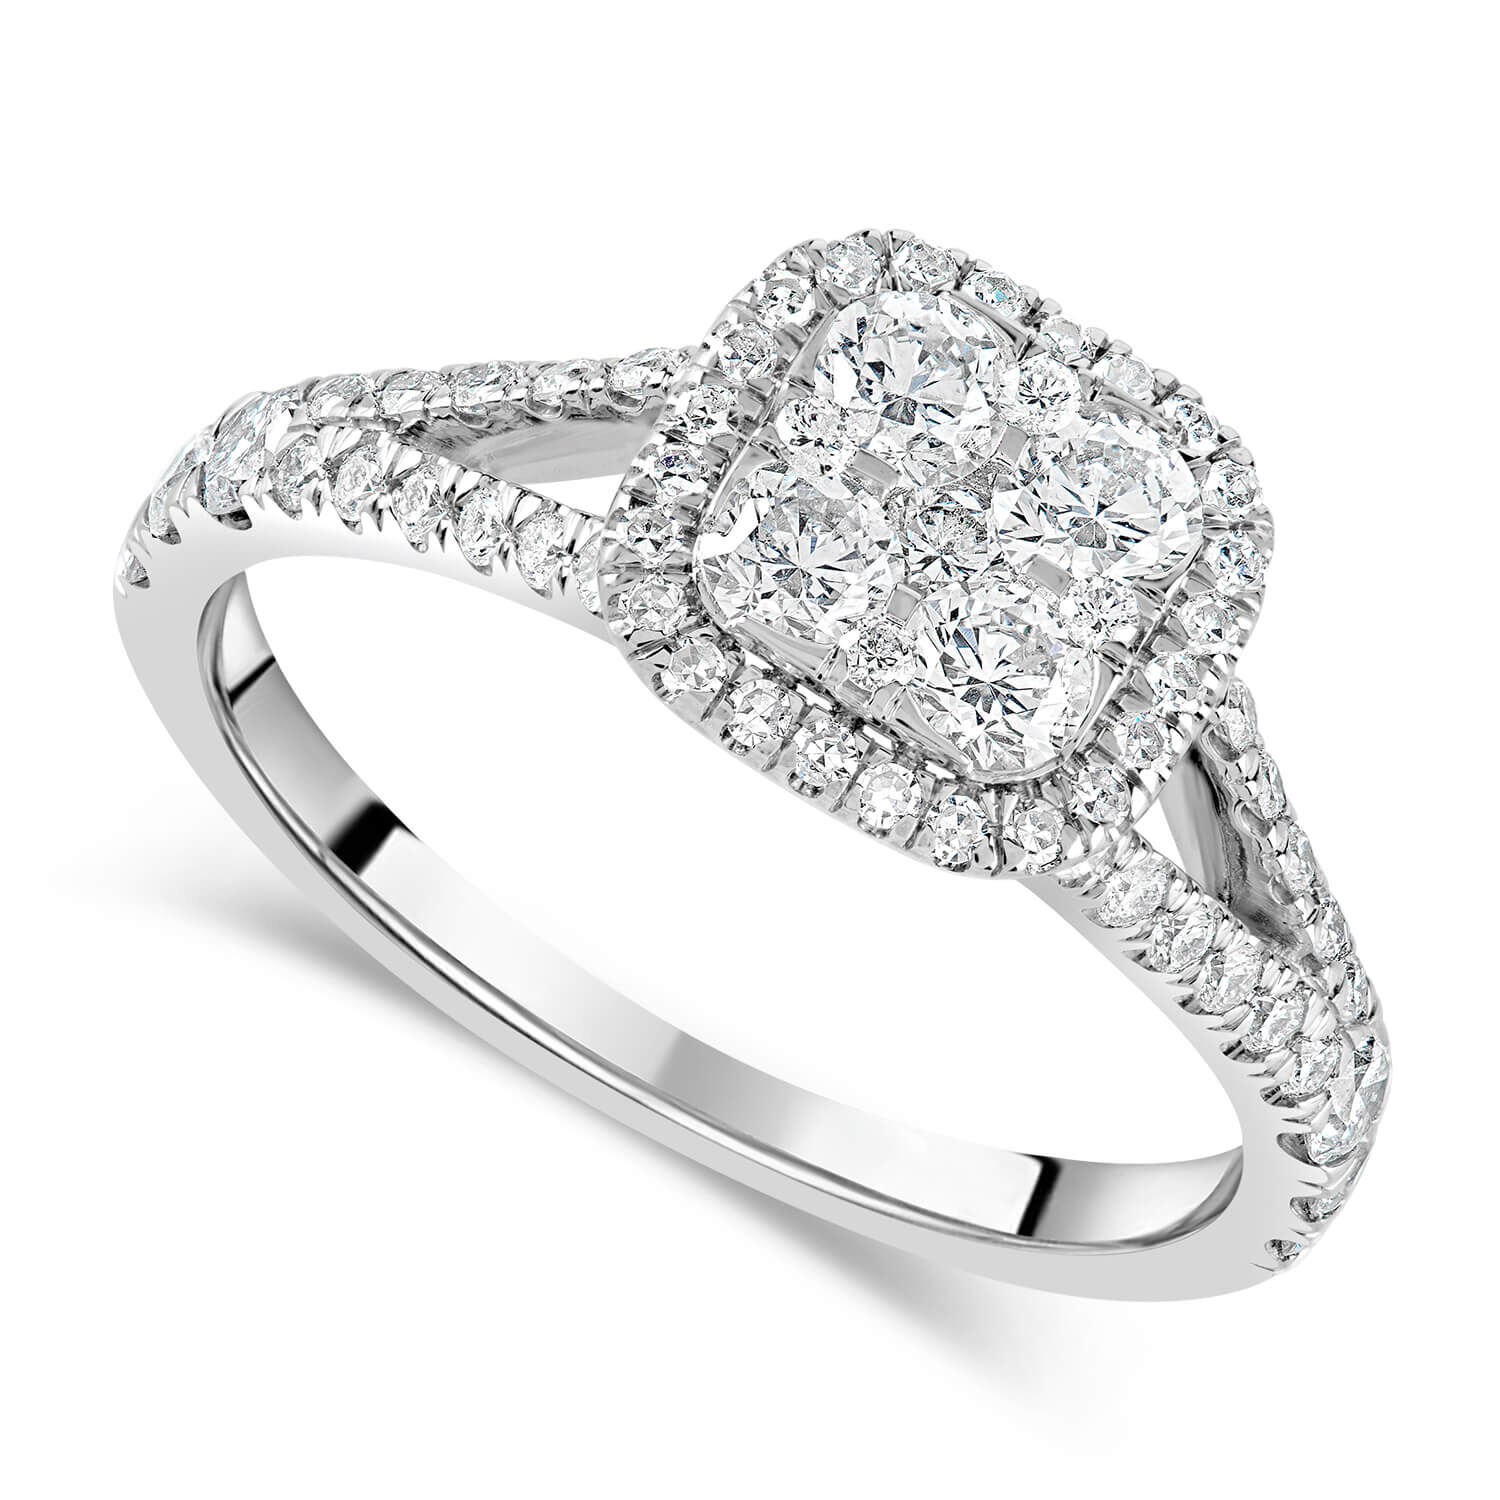 Trysor Platinum Diamond Solitaire Engagement Ring With Diamond Shoulders  (0.37ct) -